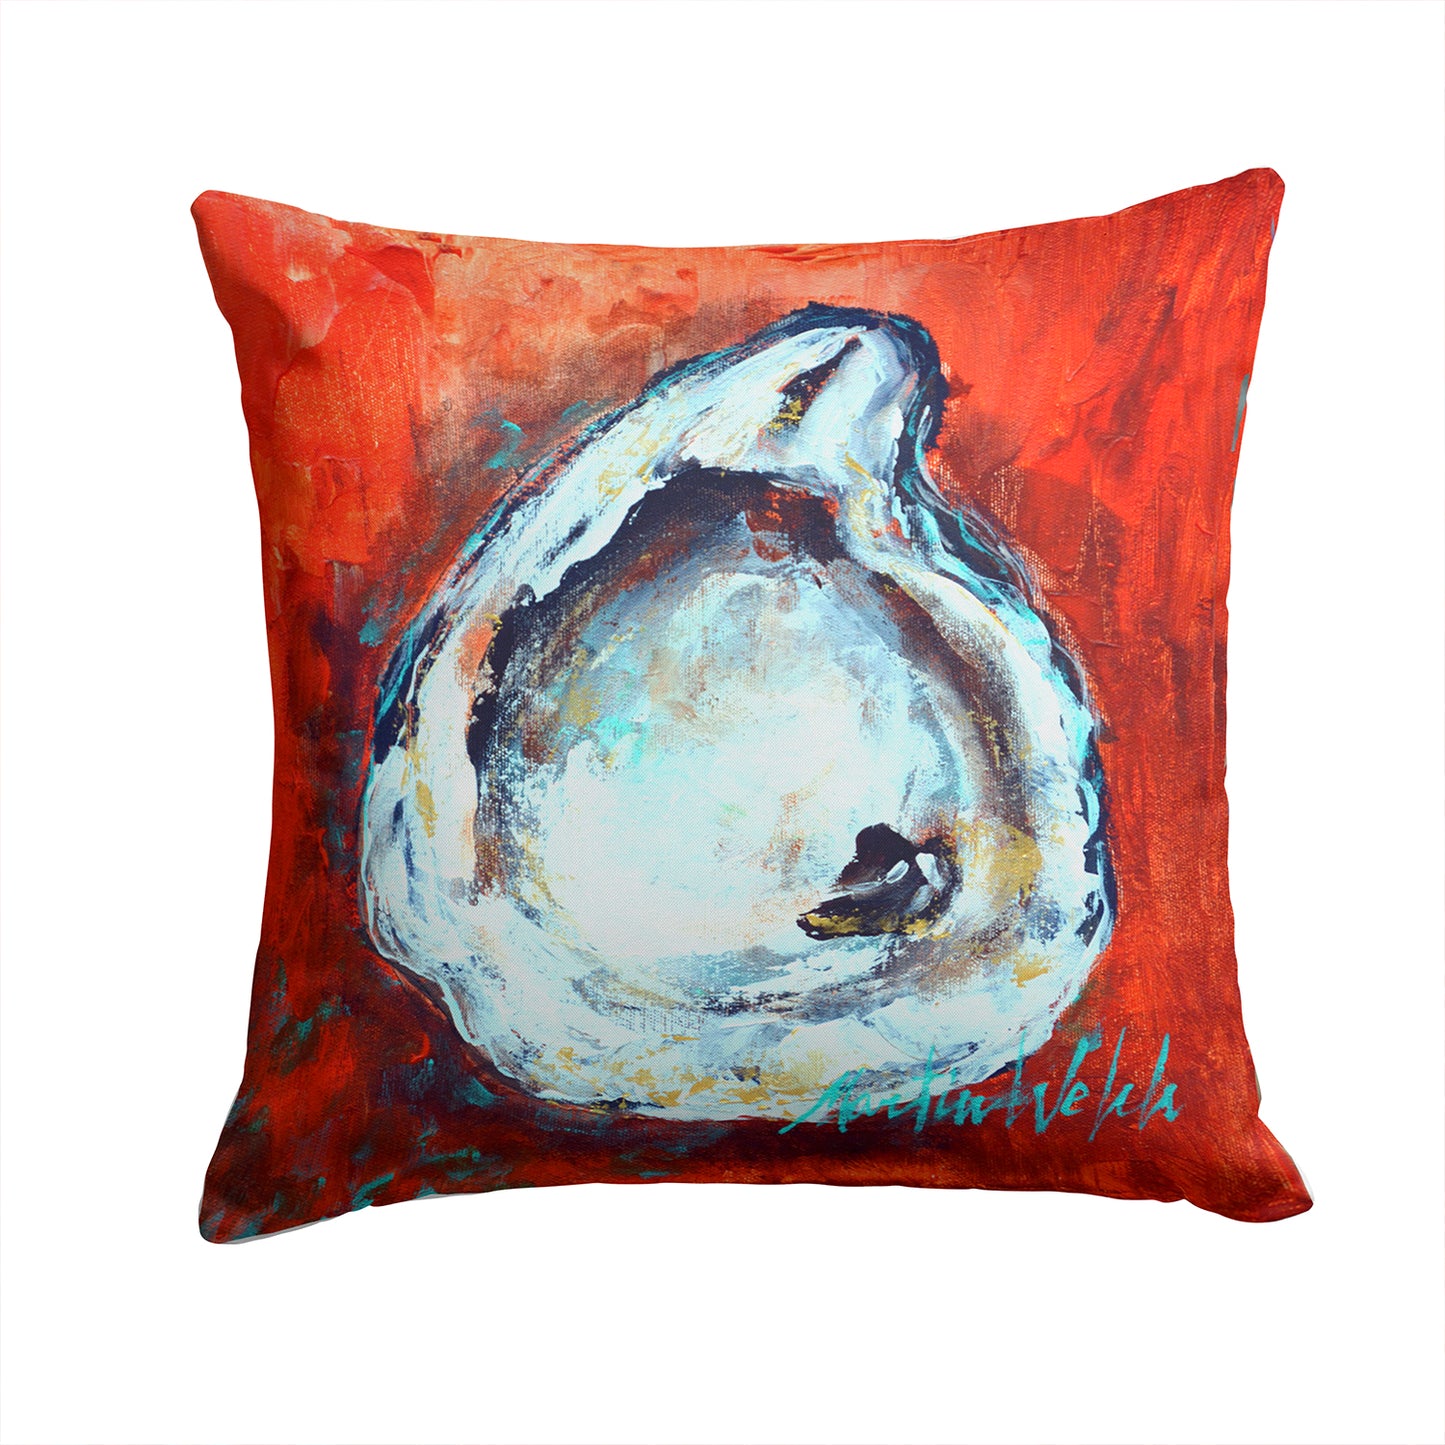 Buy this Char Broiled Oyster Fabric Decorative Pillow